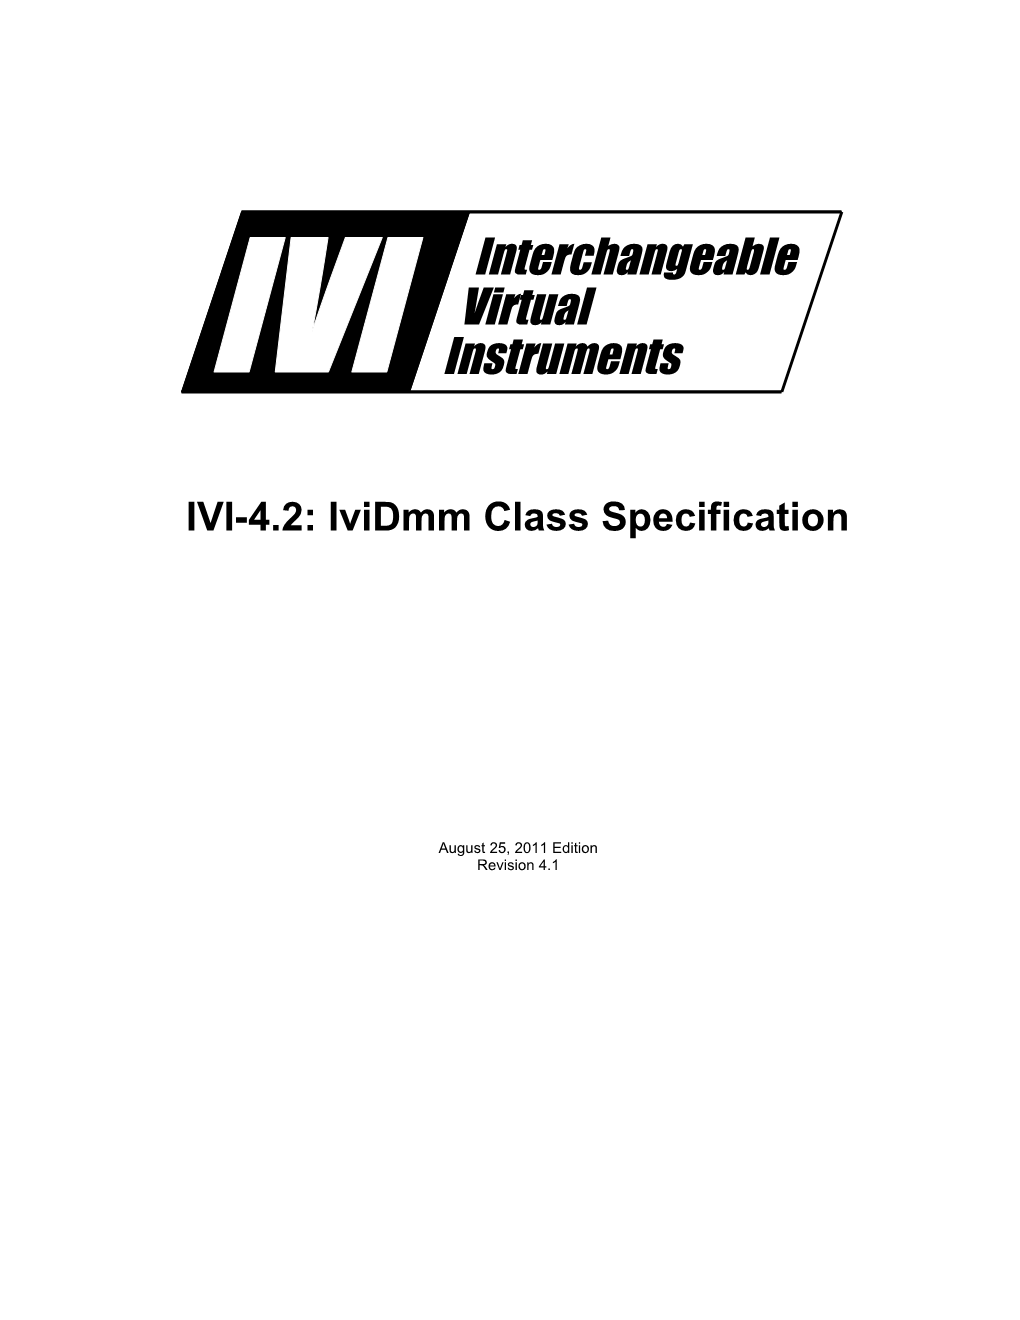 Ividmm Class Specification